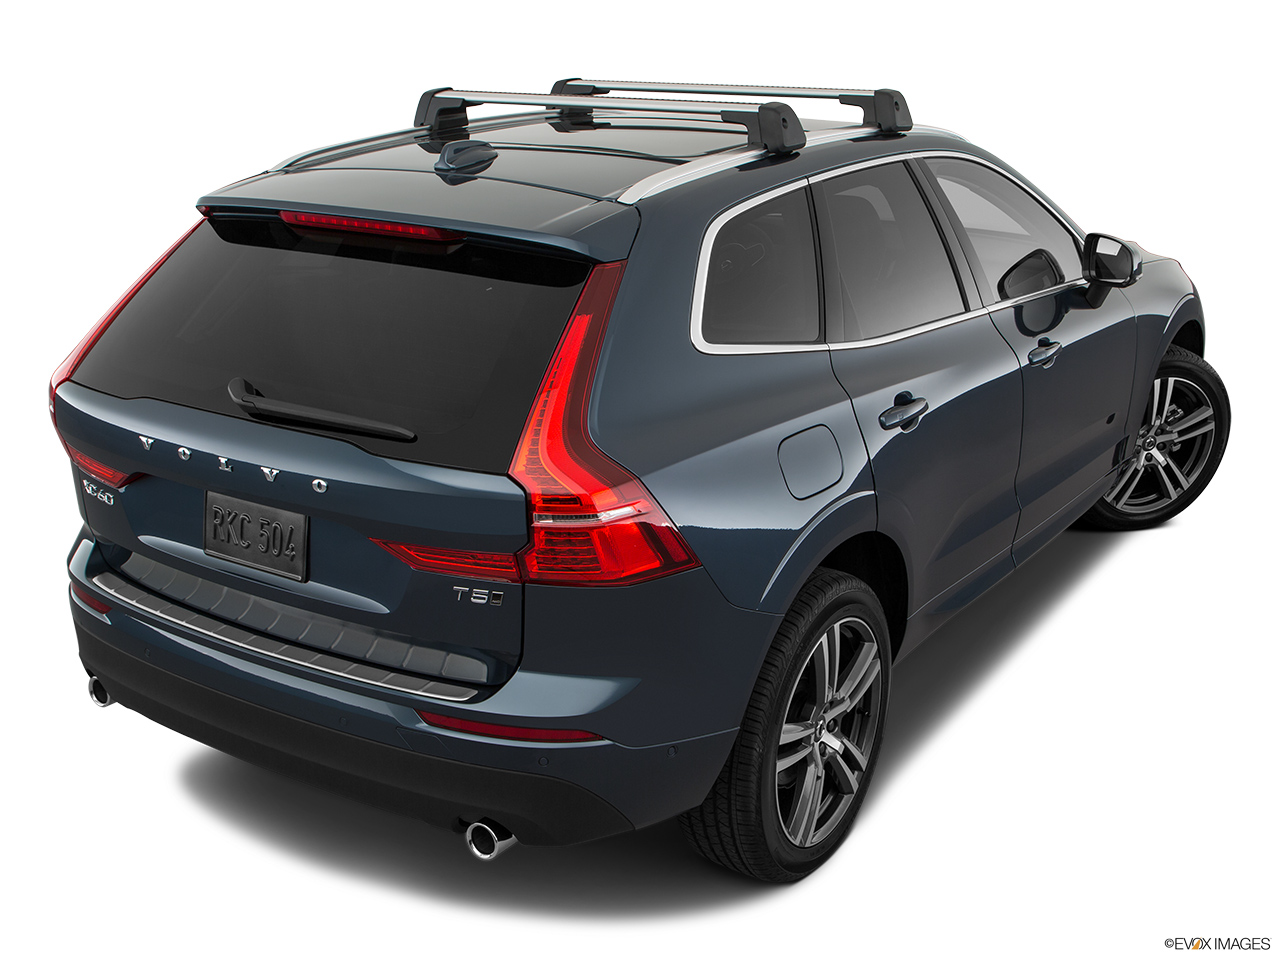 2018 Volvo XC60 T5 Momentum Rear 3/4 angle view. 